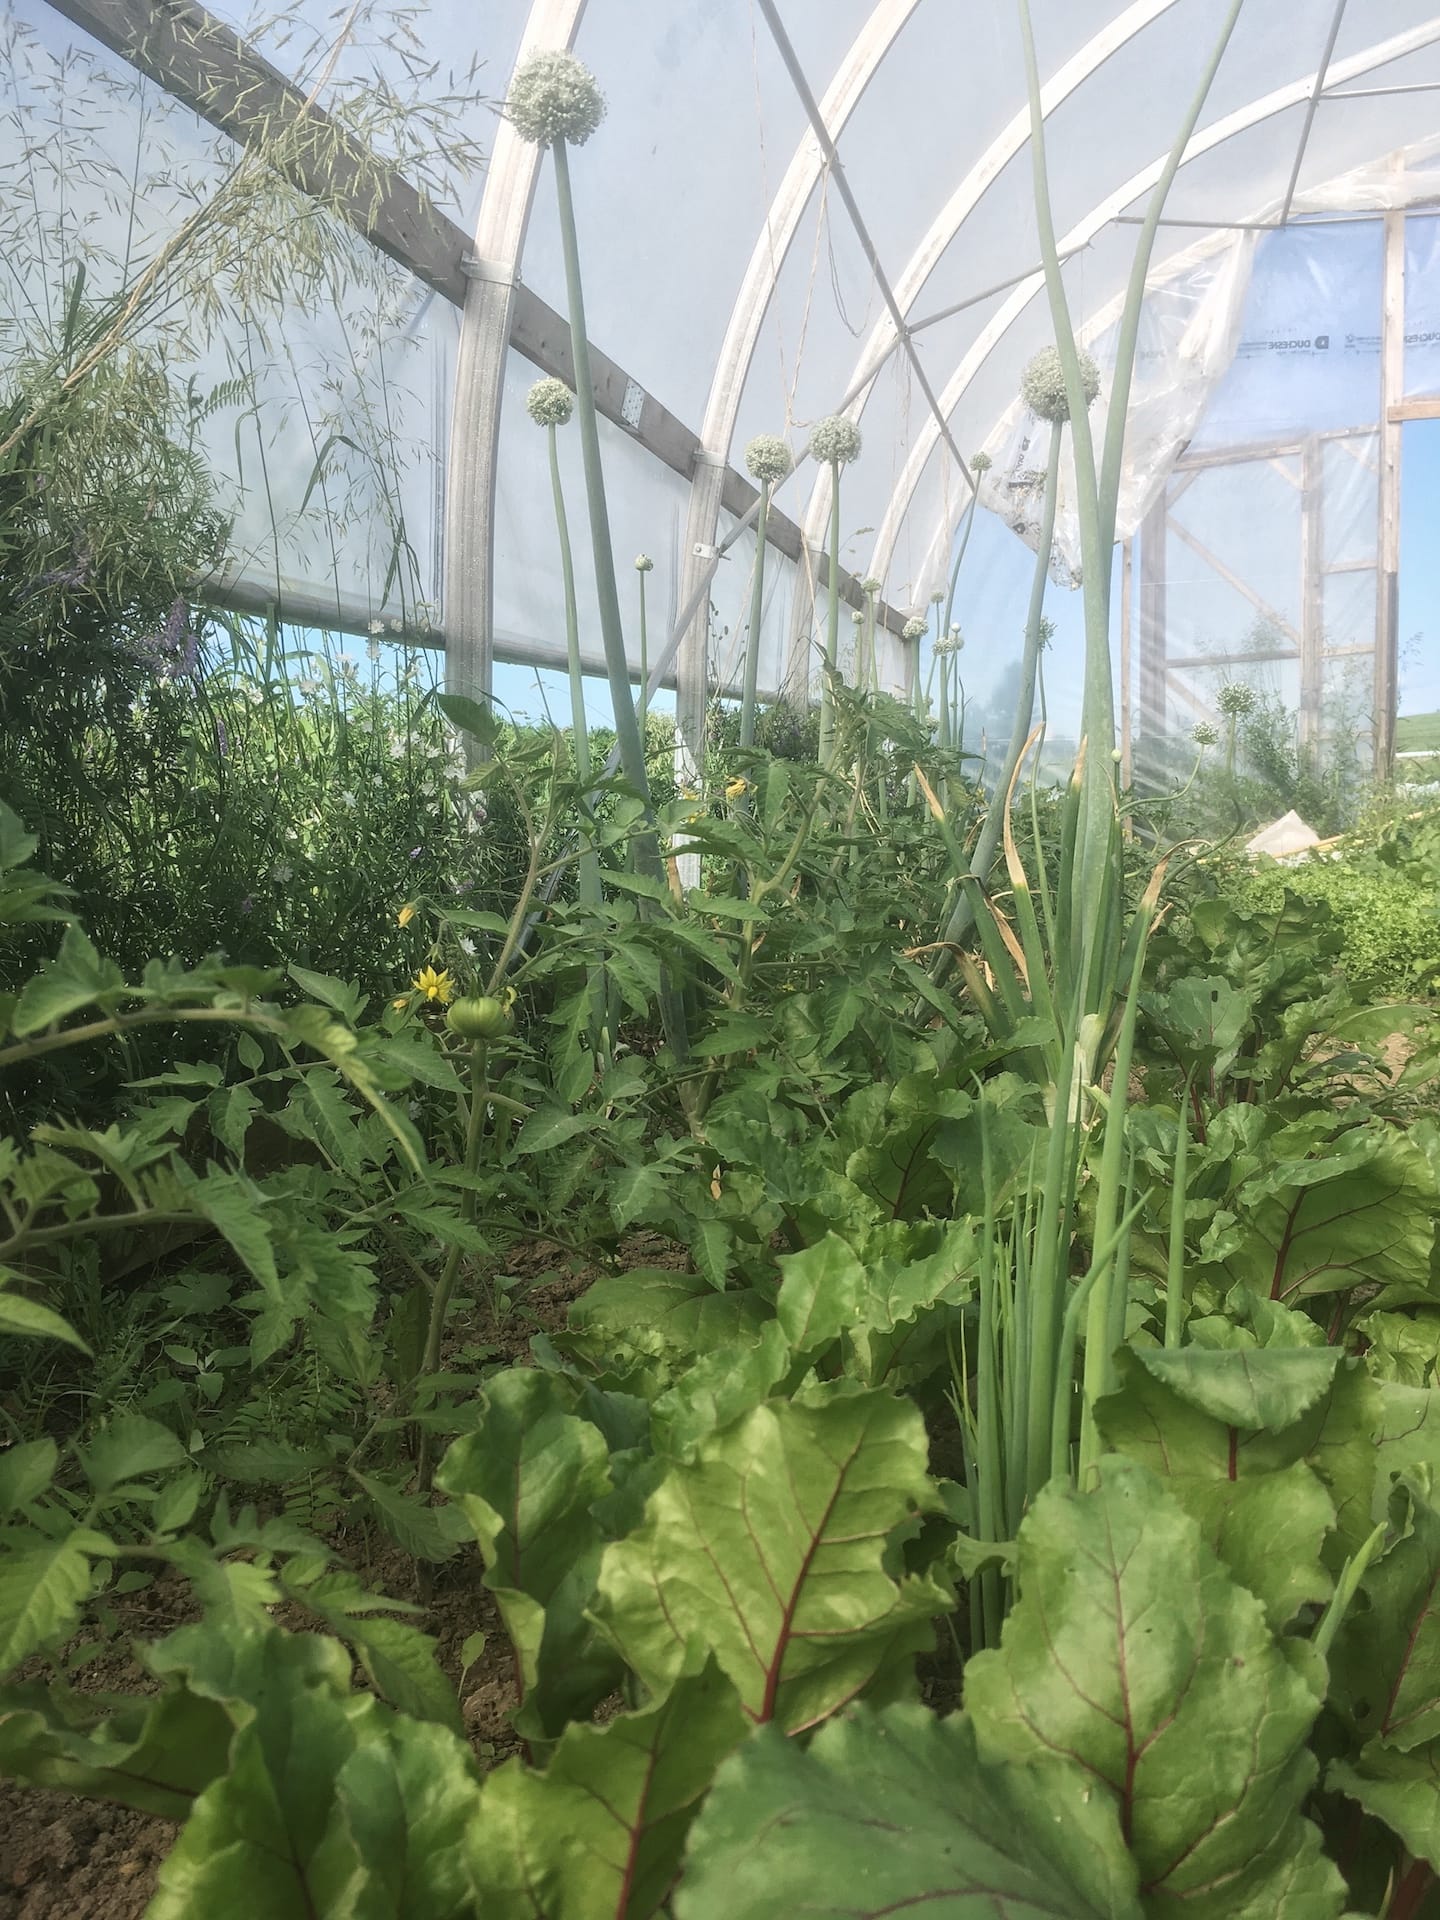 Greens in the greenhouse, worm's eye view